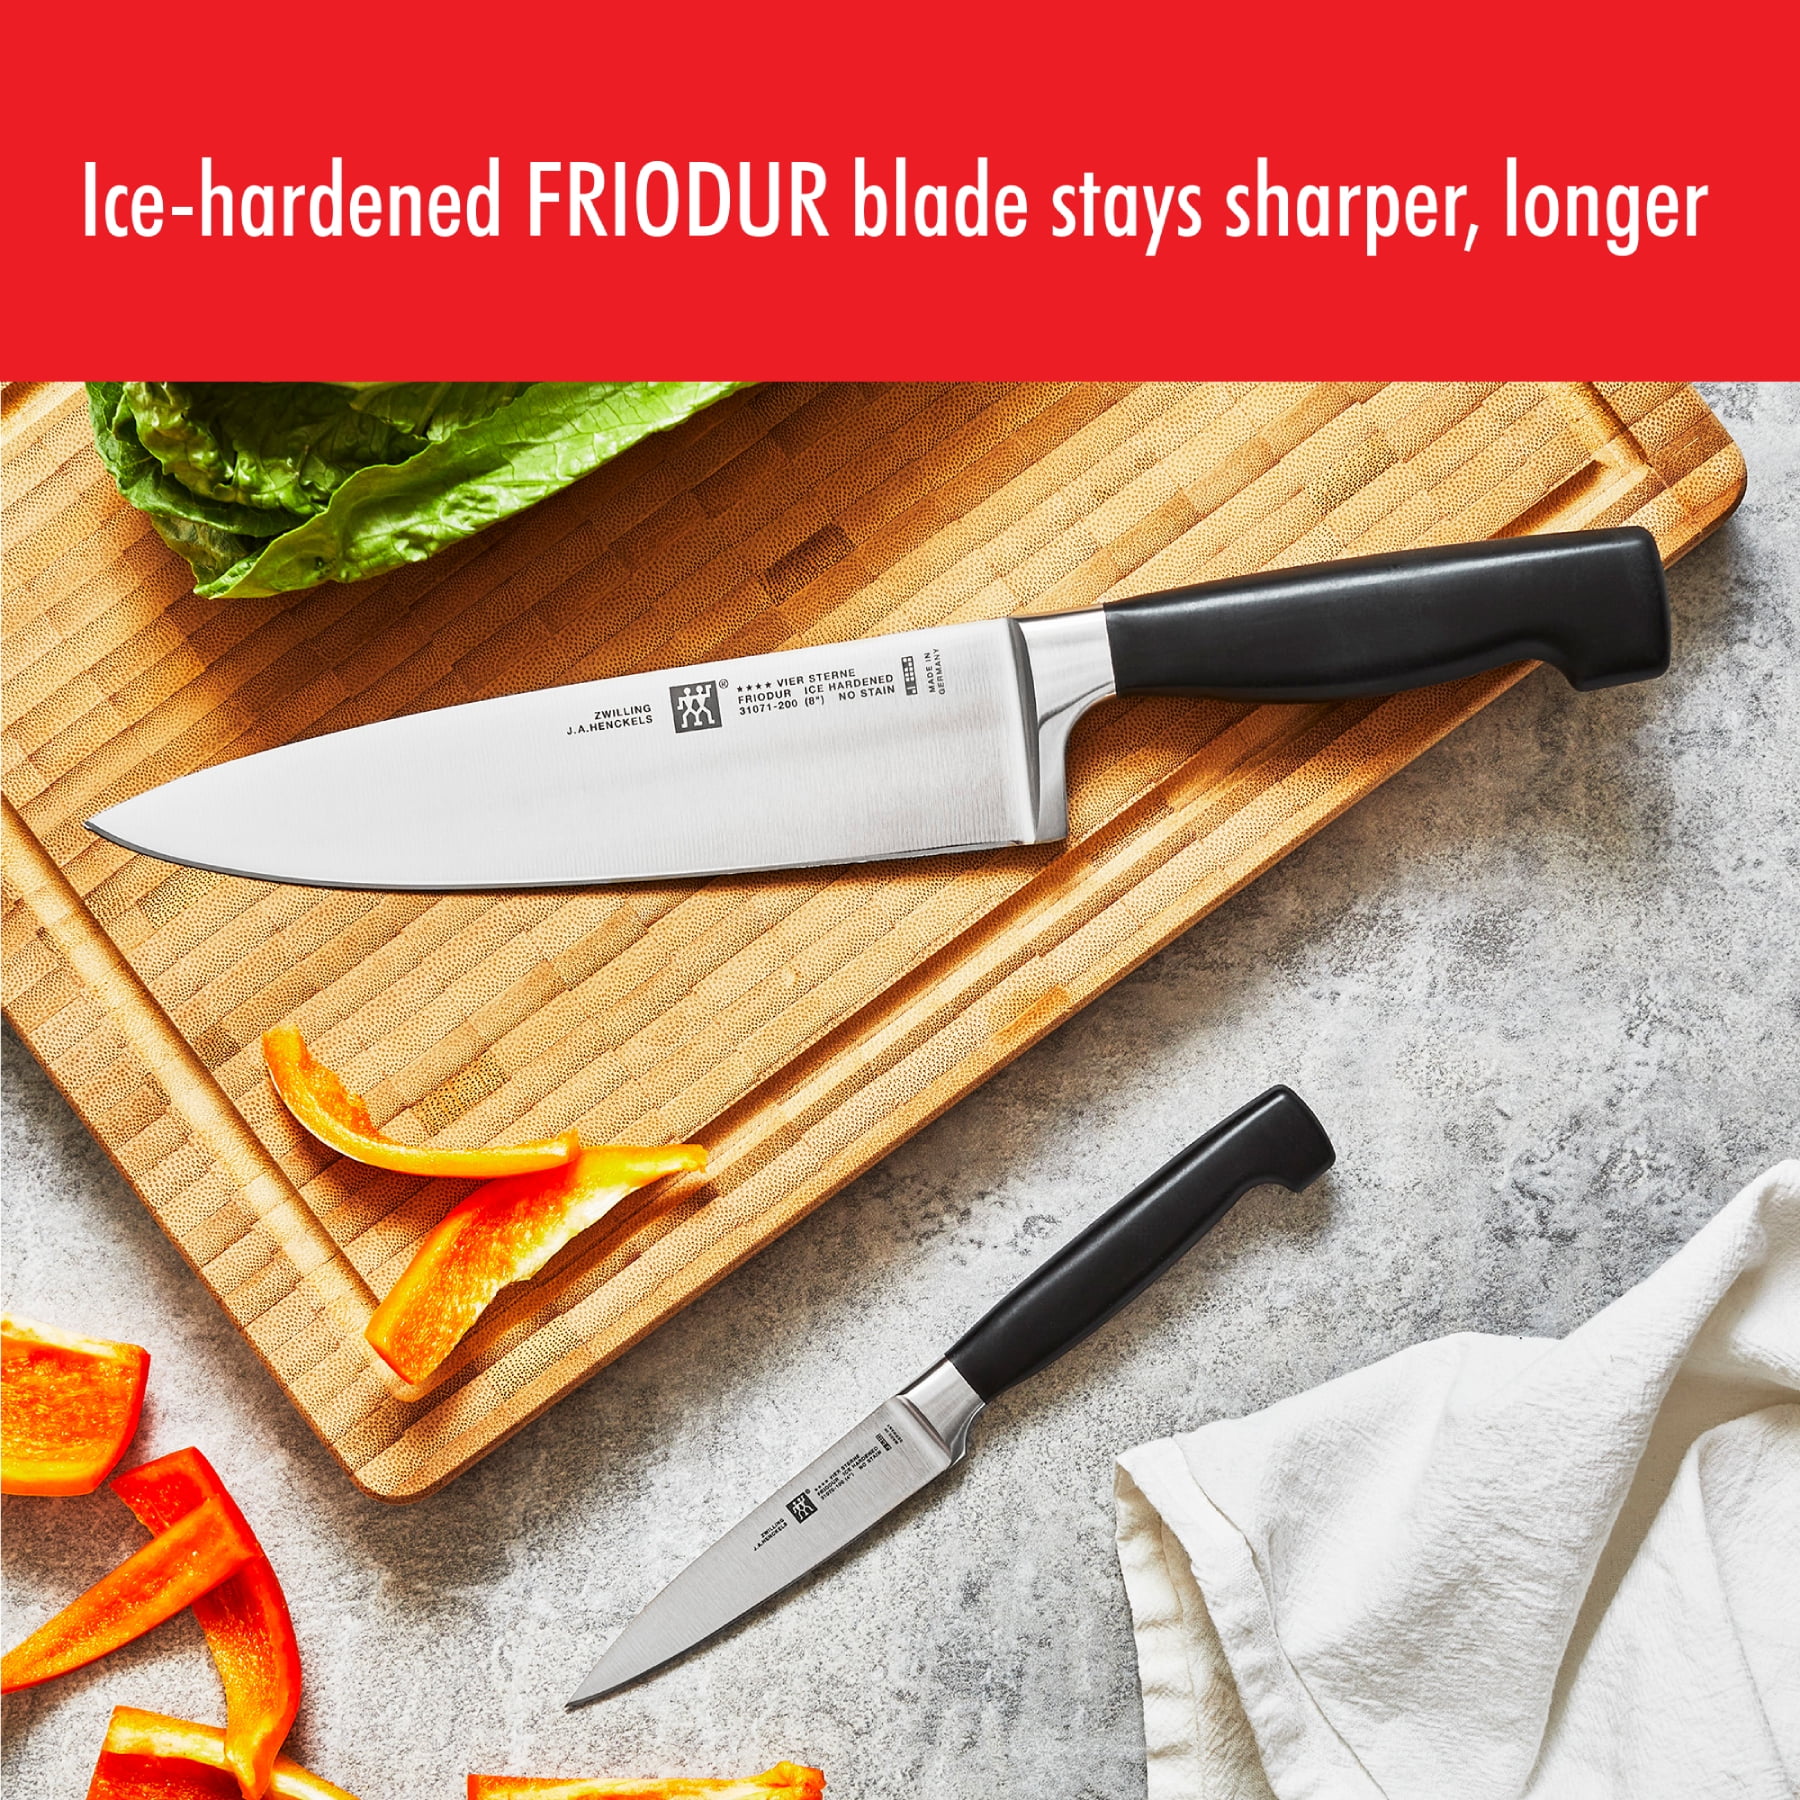 Zwilling J.A. Henckels TWIN Four Star 7-Piece Self-Sharpening Knife Bl —  Faraday's Kitchen Store